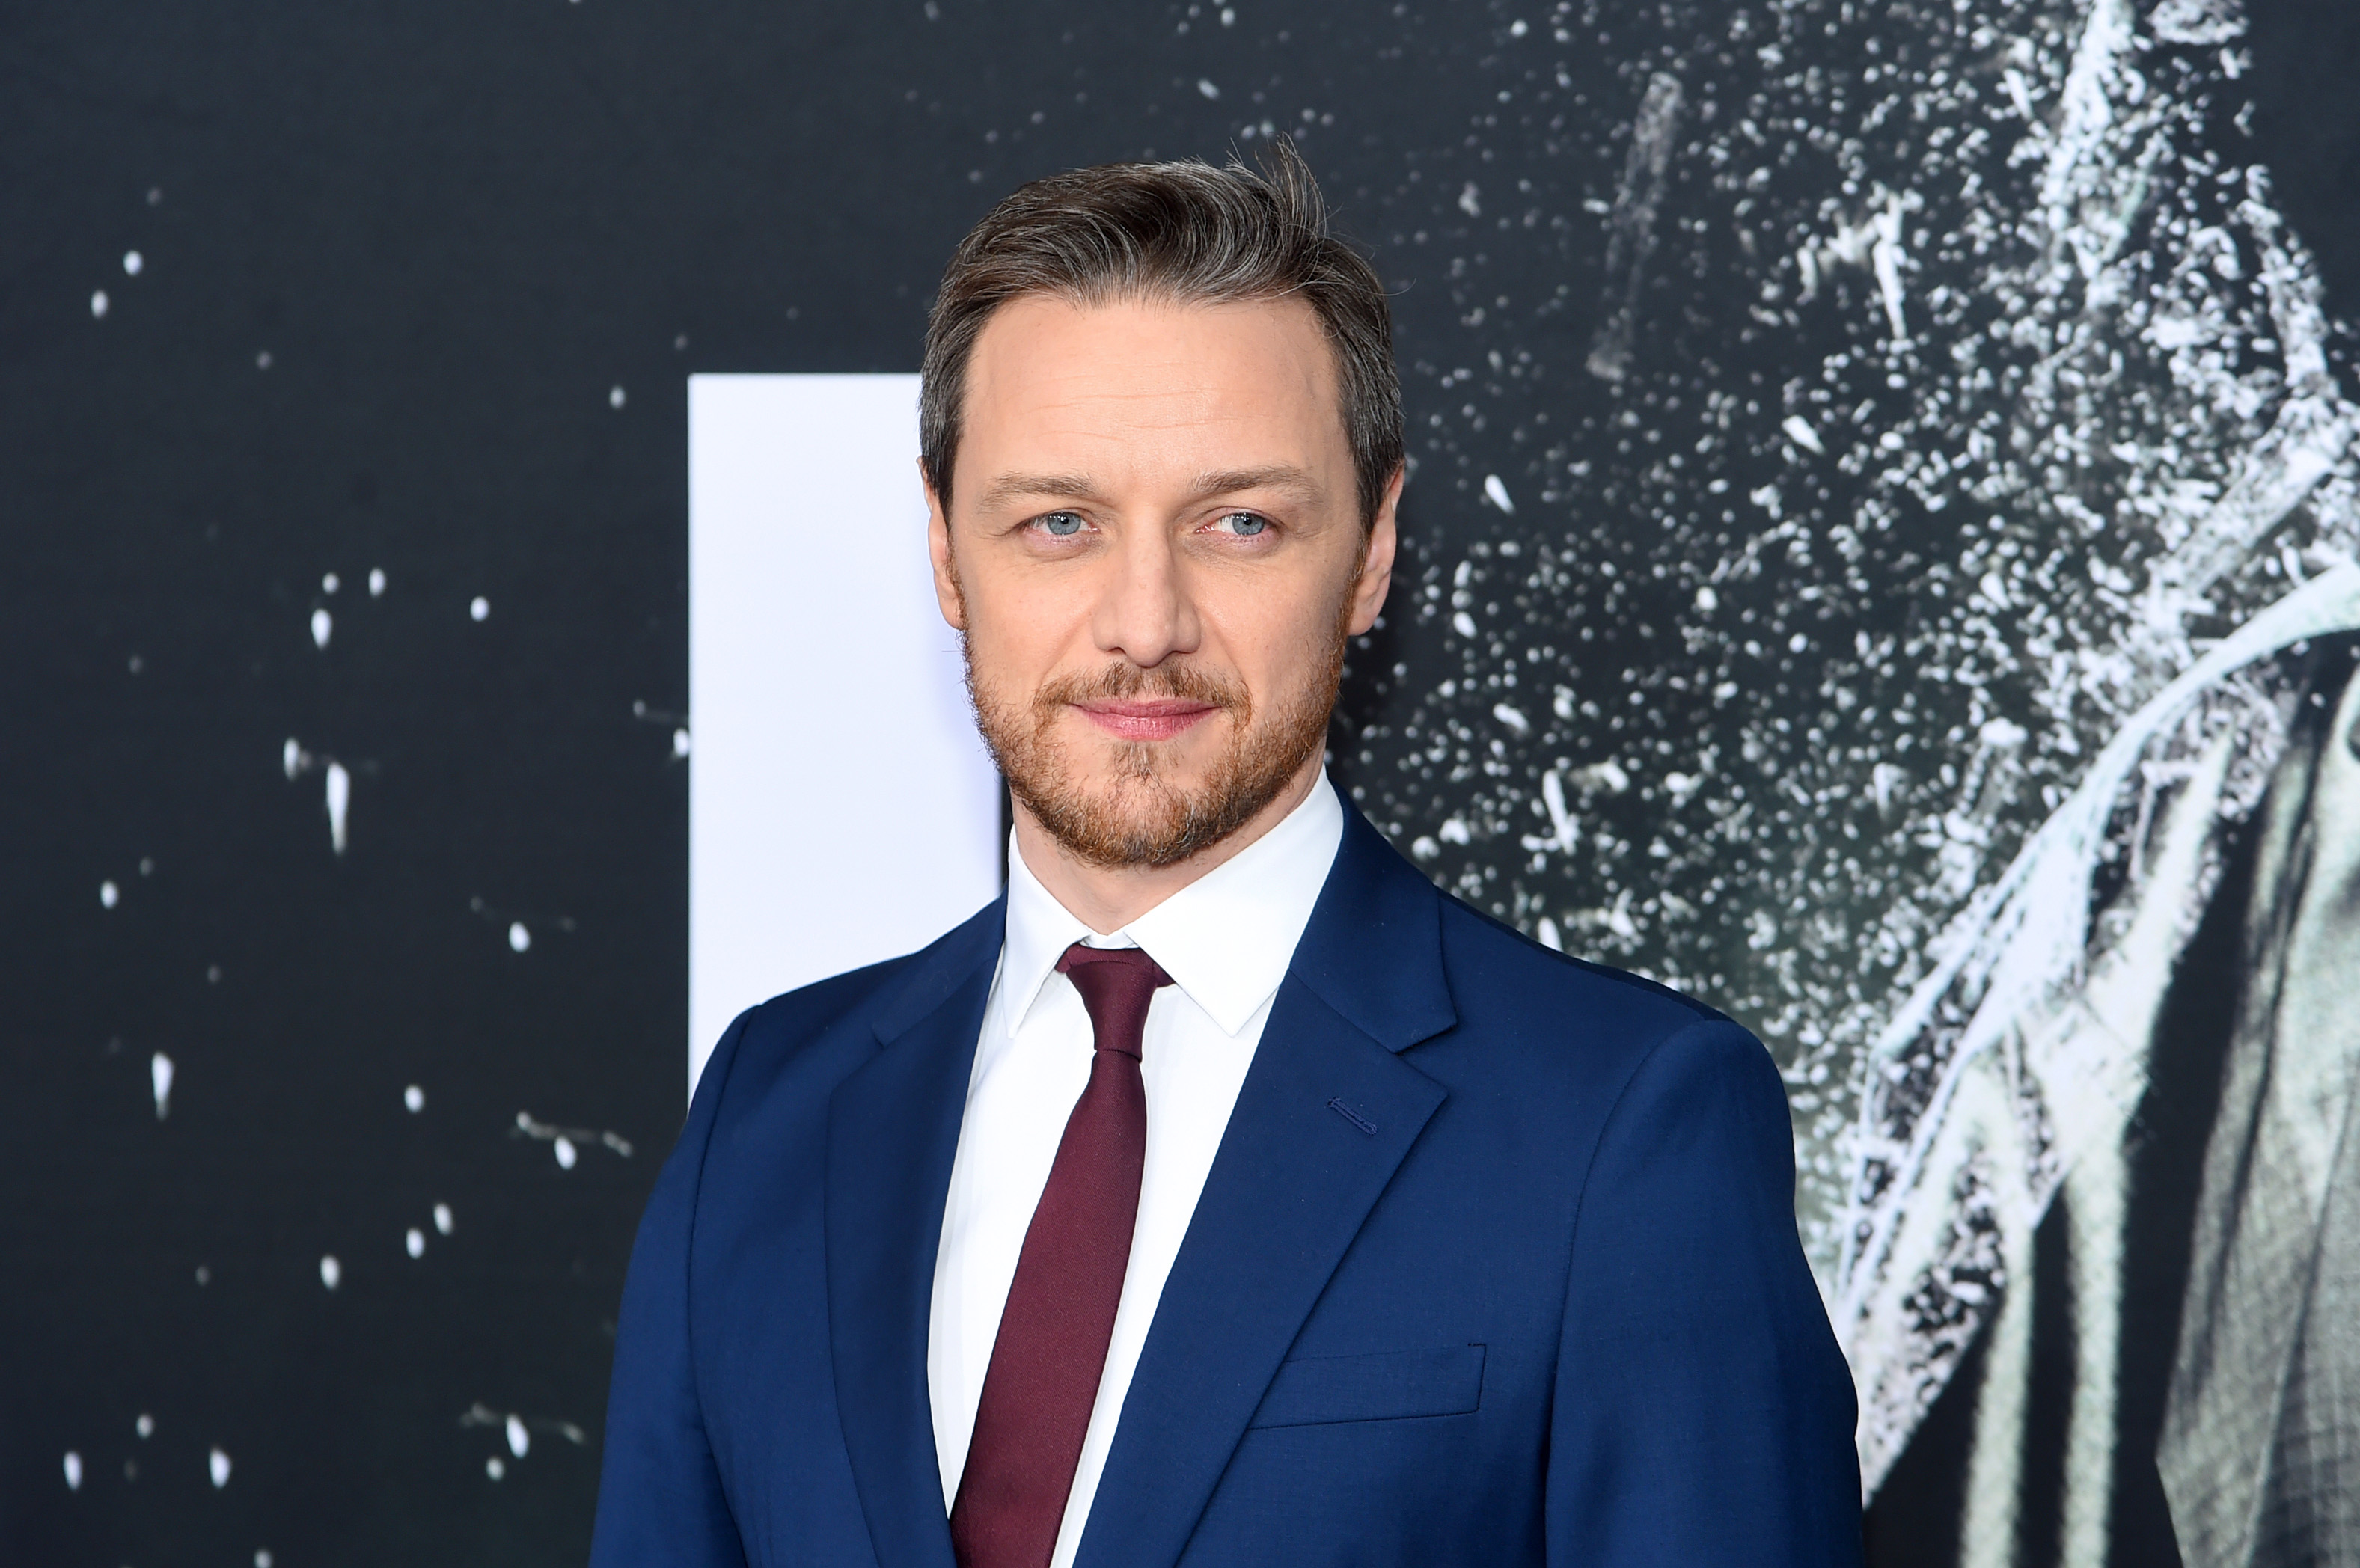 James McAvoy attends the "Glass" New York Premiere at SVA Theater on January 15, 2019, in New York City. | Source: Getty Images